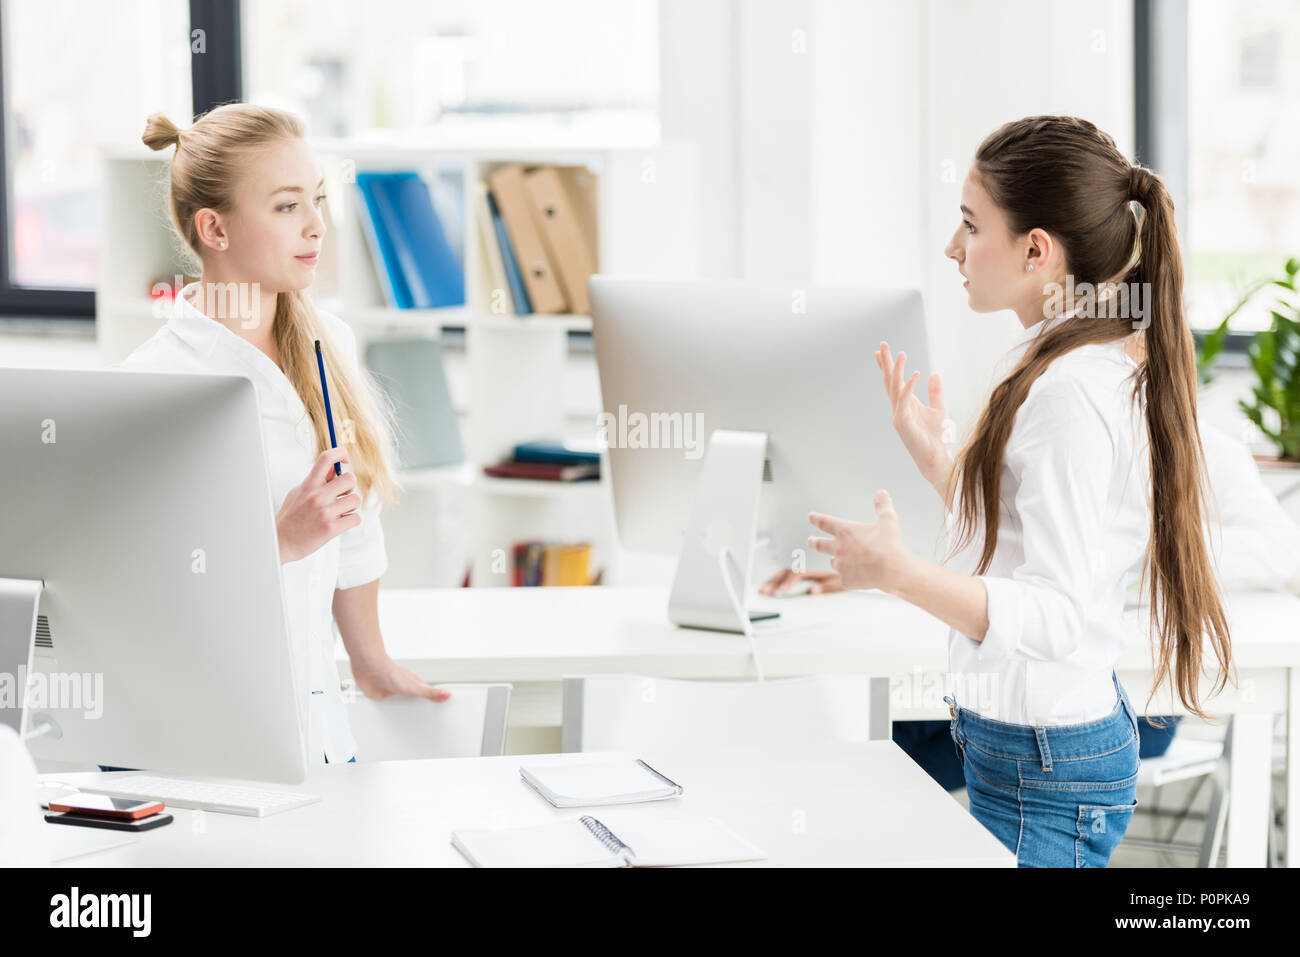 side view of teen girls discussing task together while standing in computer class Stock Photo